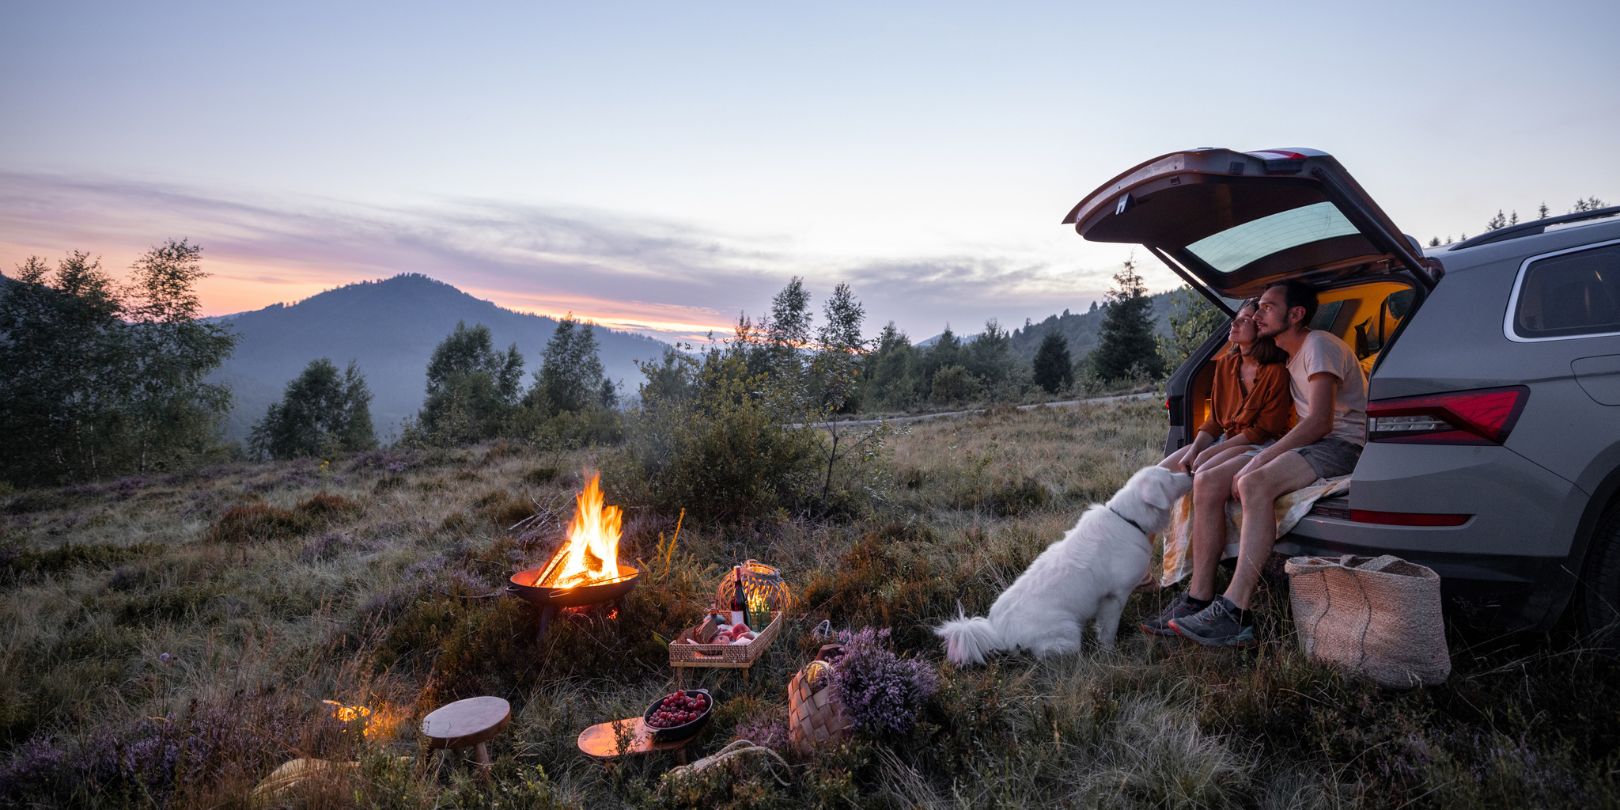 Couple with Car Camping in the Mountains